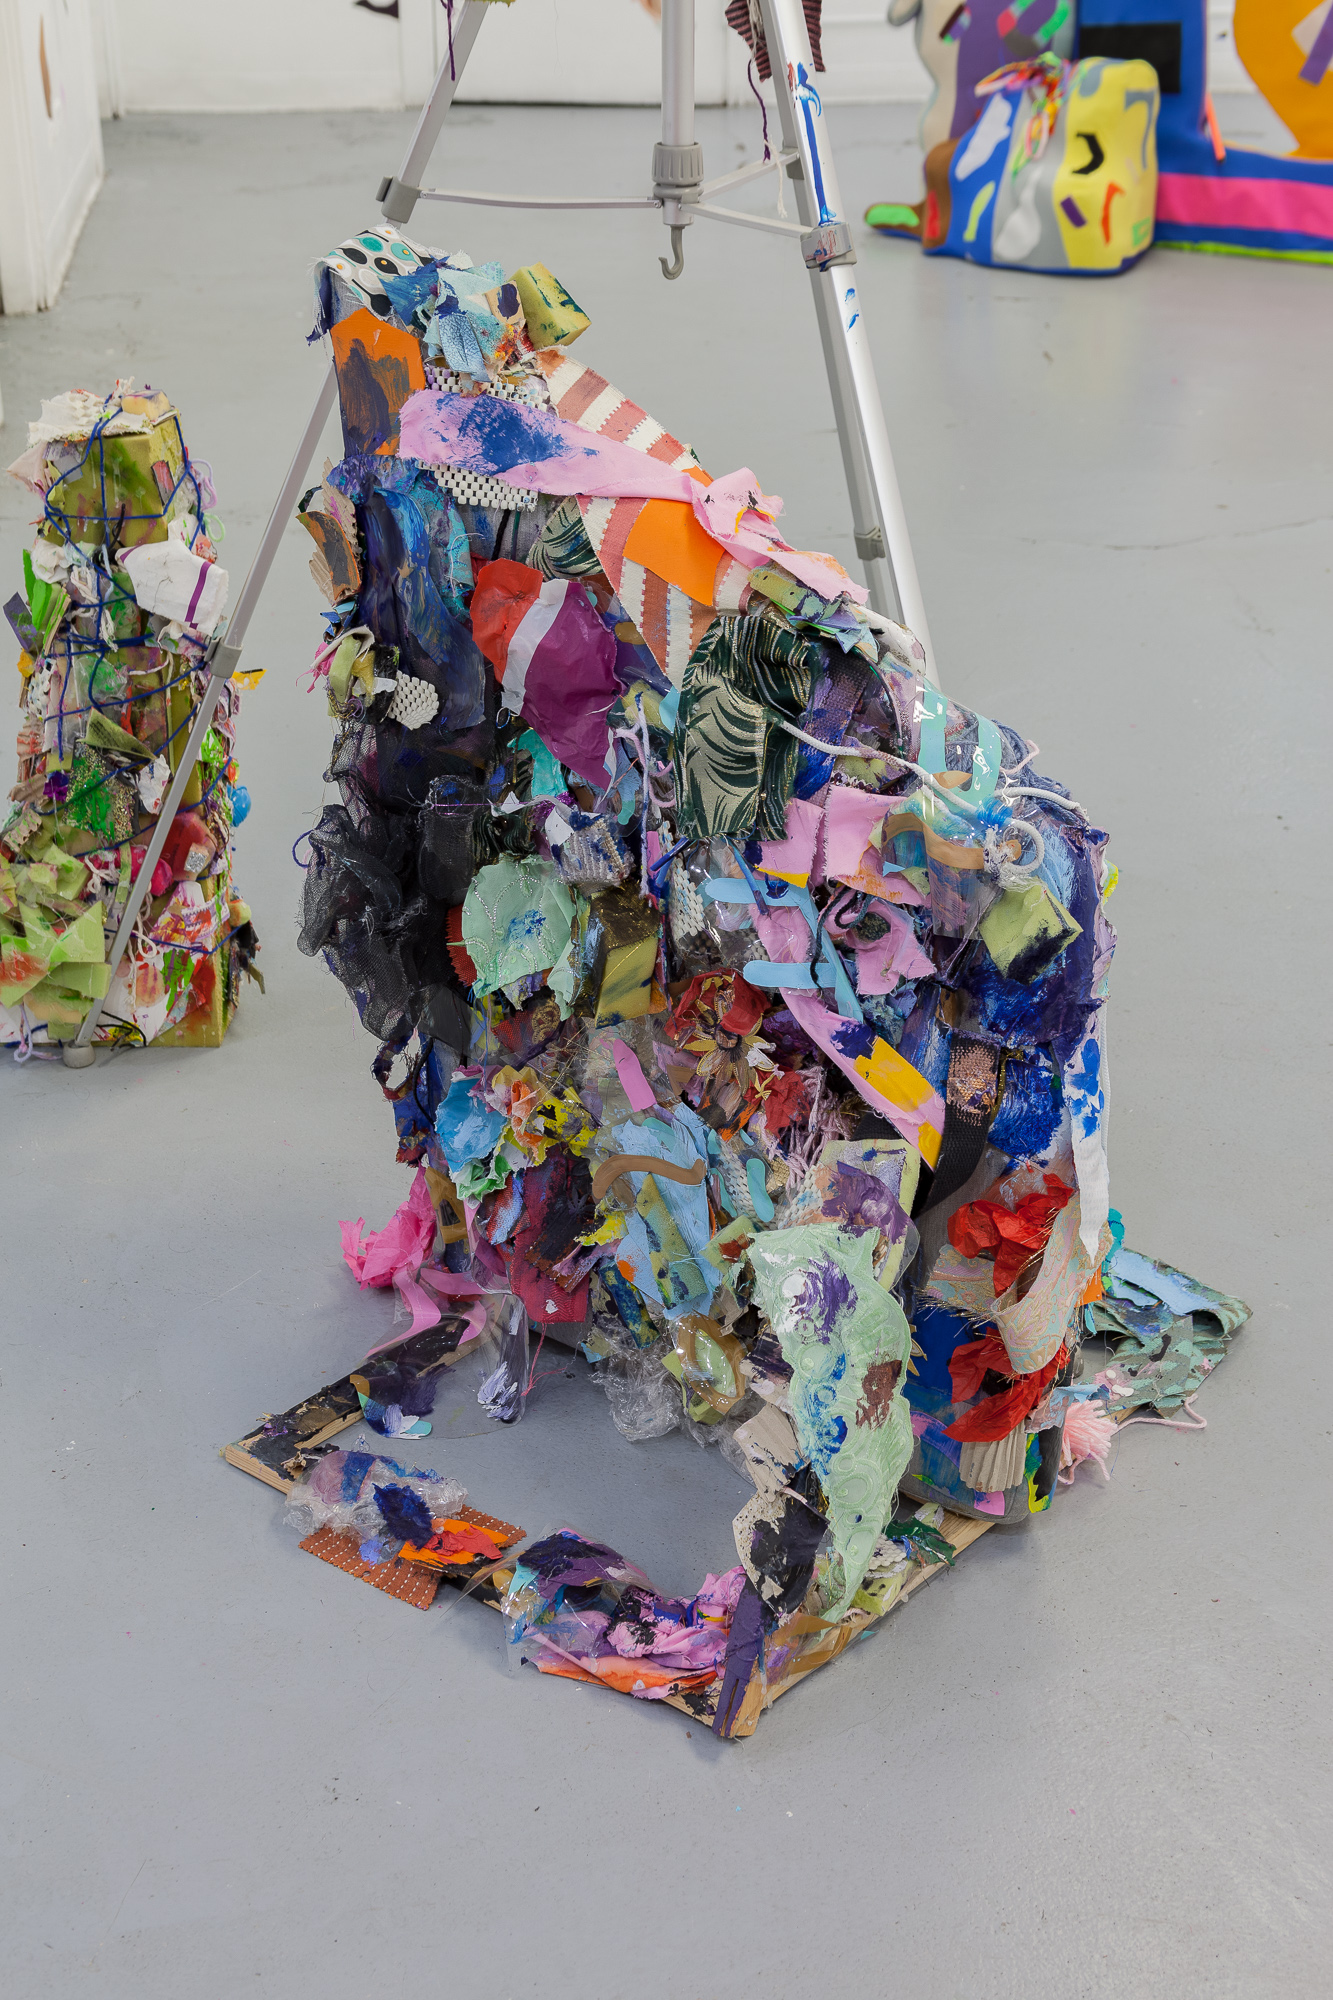  Hubert Posey,  Untitled 1-3 , 2017-2018, Mixed Media Sculptures, Dimensions variable 